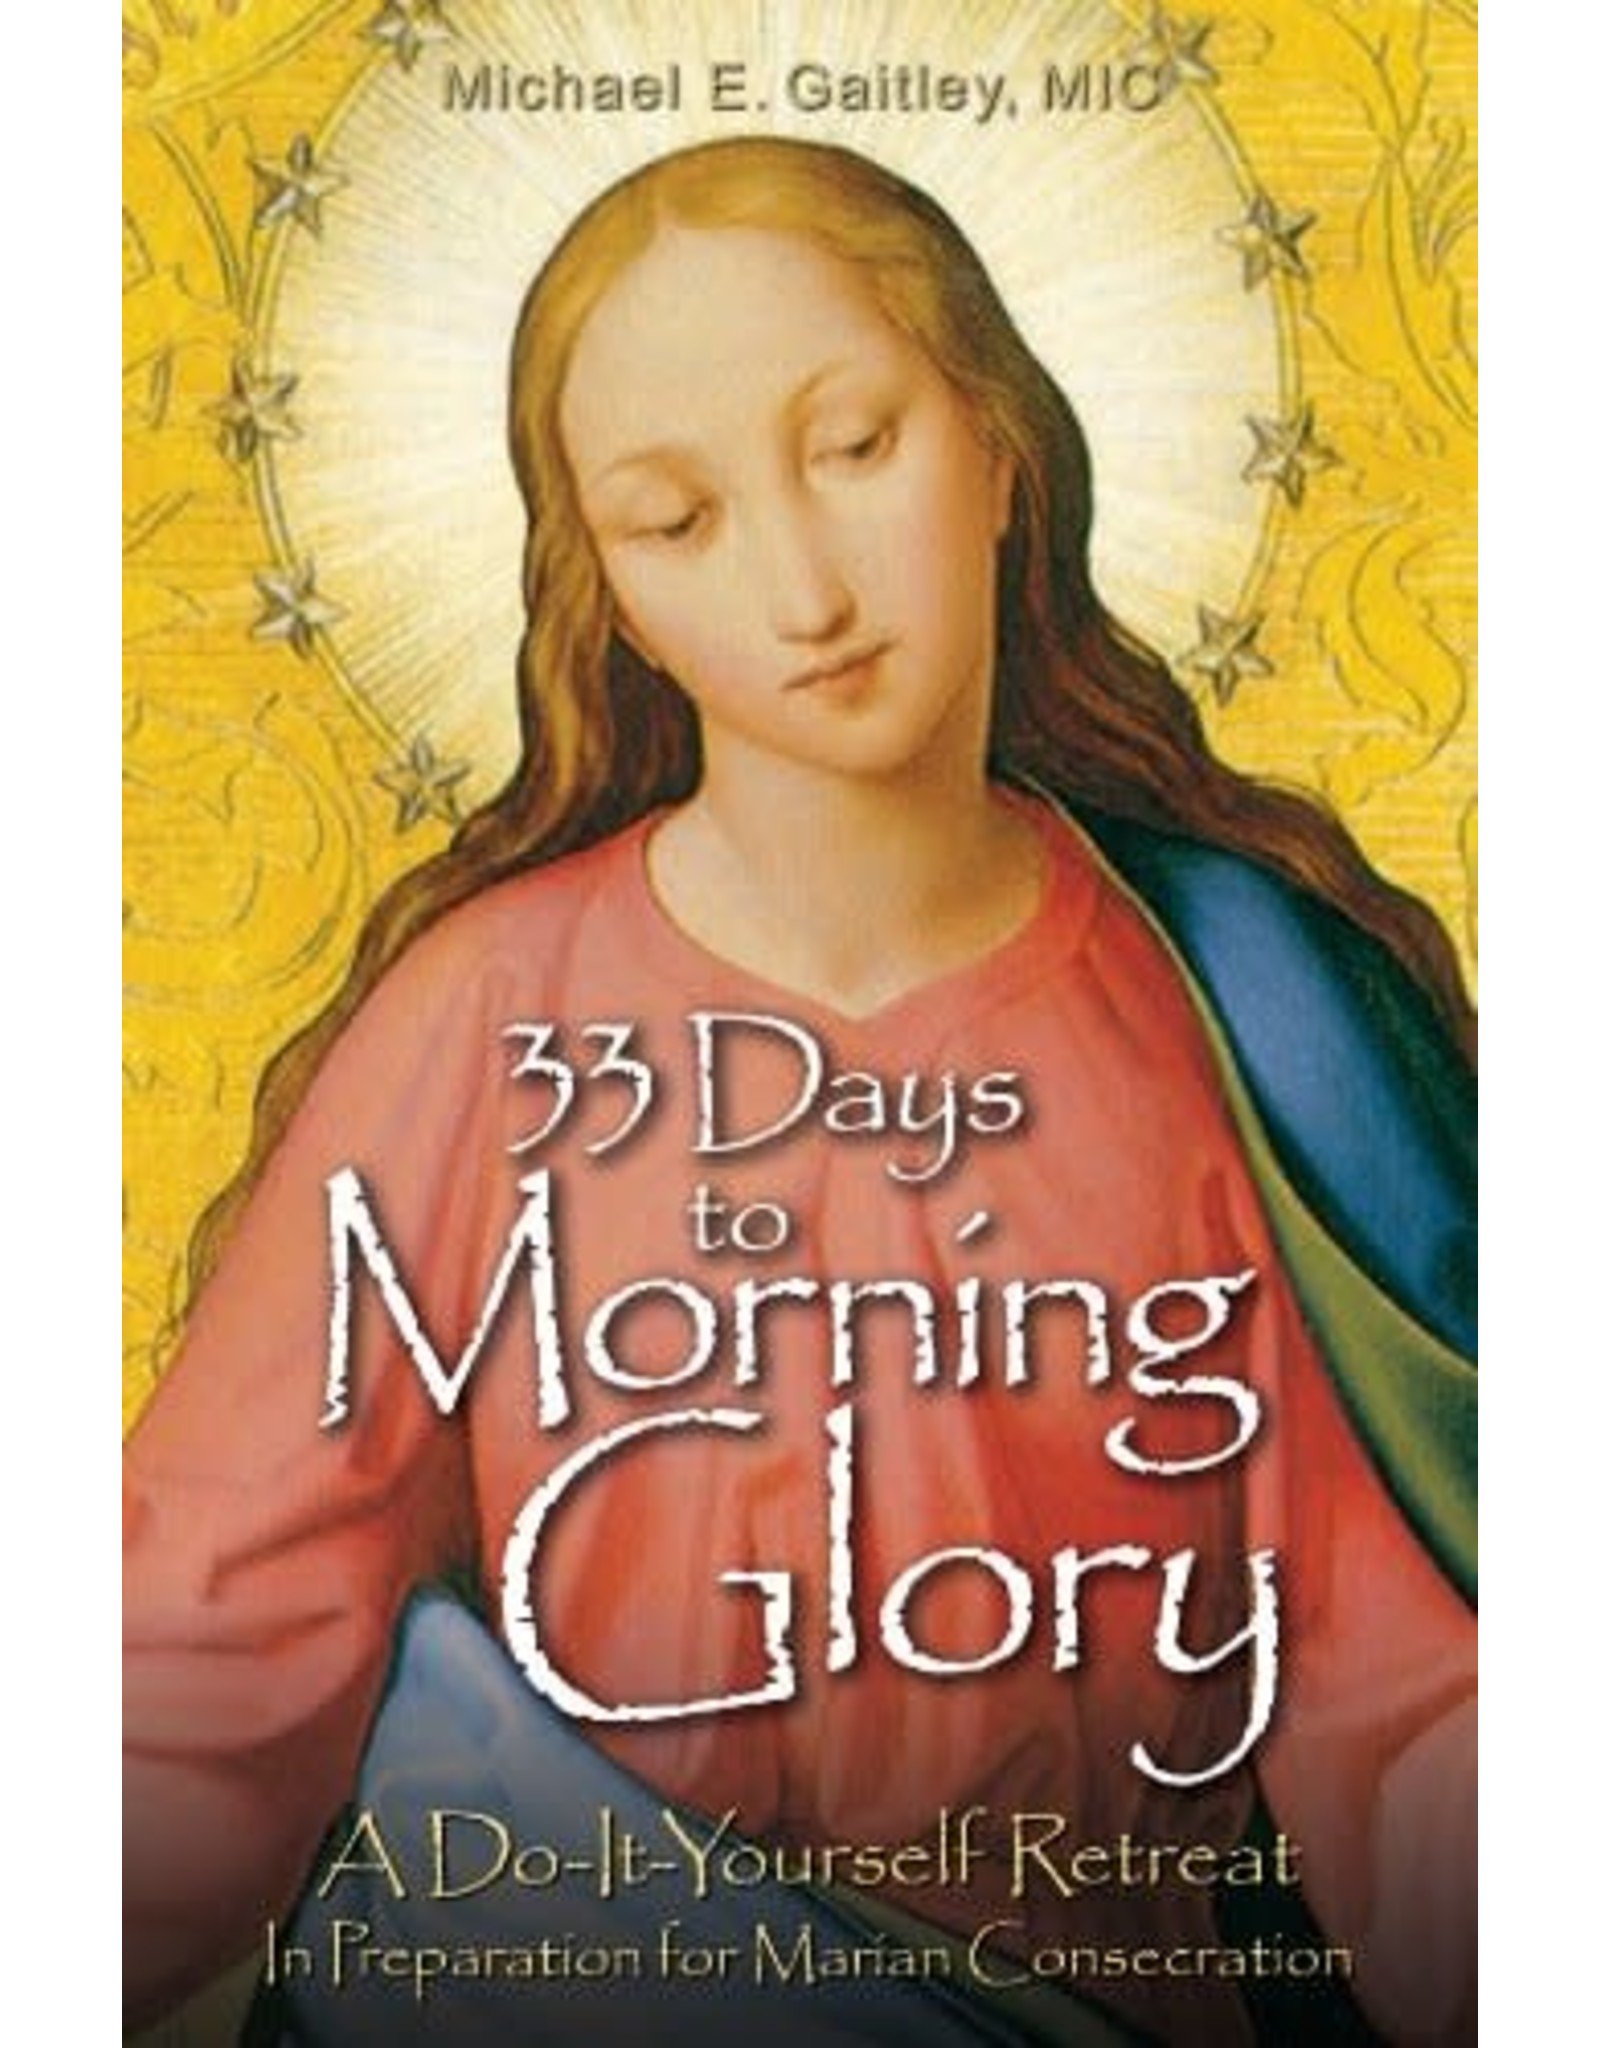 Association of Marian Helpers 33 Days to Morning Glory: A Do-It-Yourself Retreat In Preparation for Marian Consecration  by Michael E. Gaitley (Paperback)